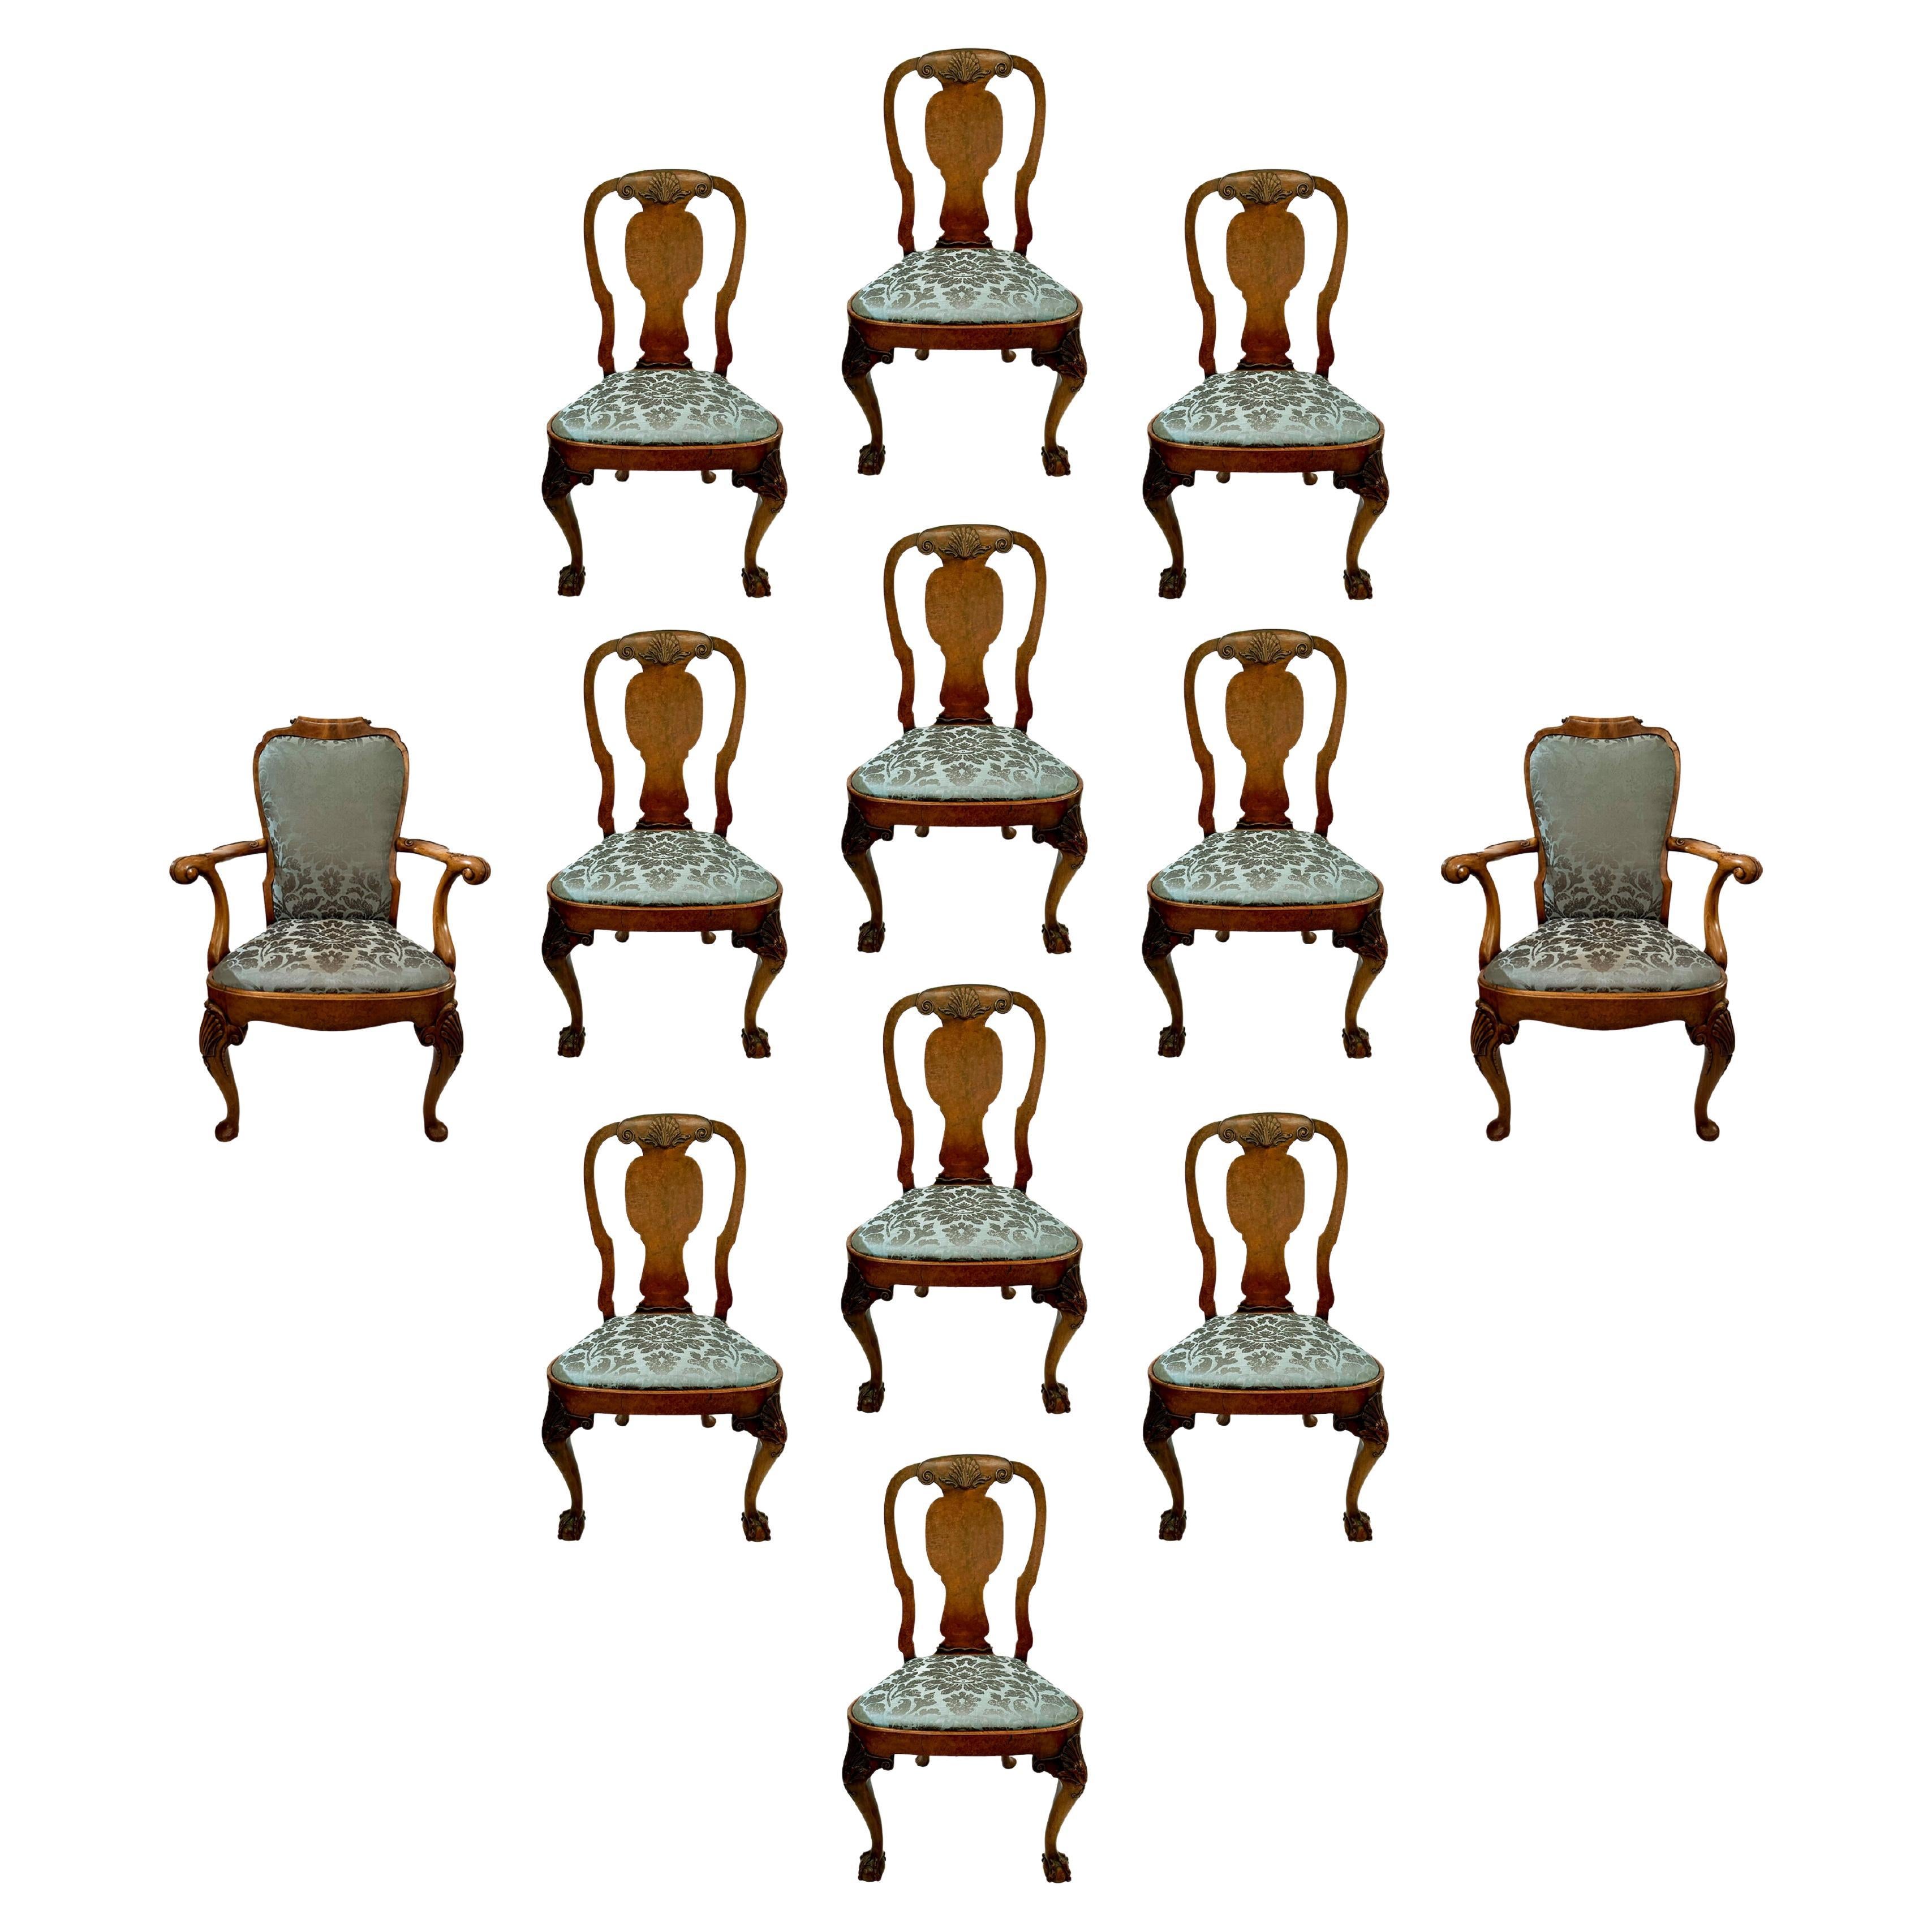 Set of 12 Antique English Burled Walnut Queen Anne Dining Chairs, Circa 1890.